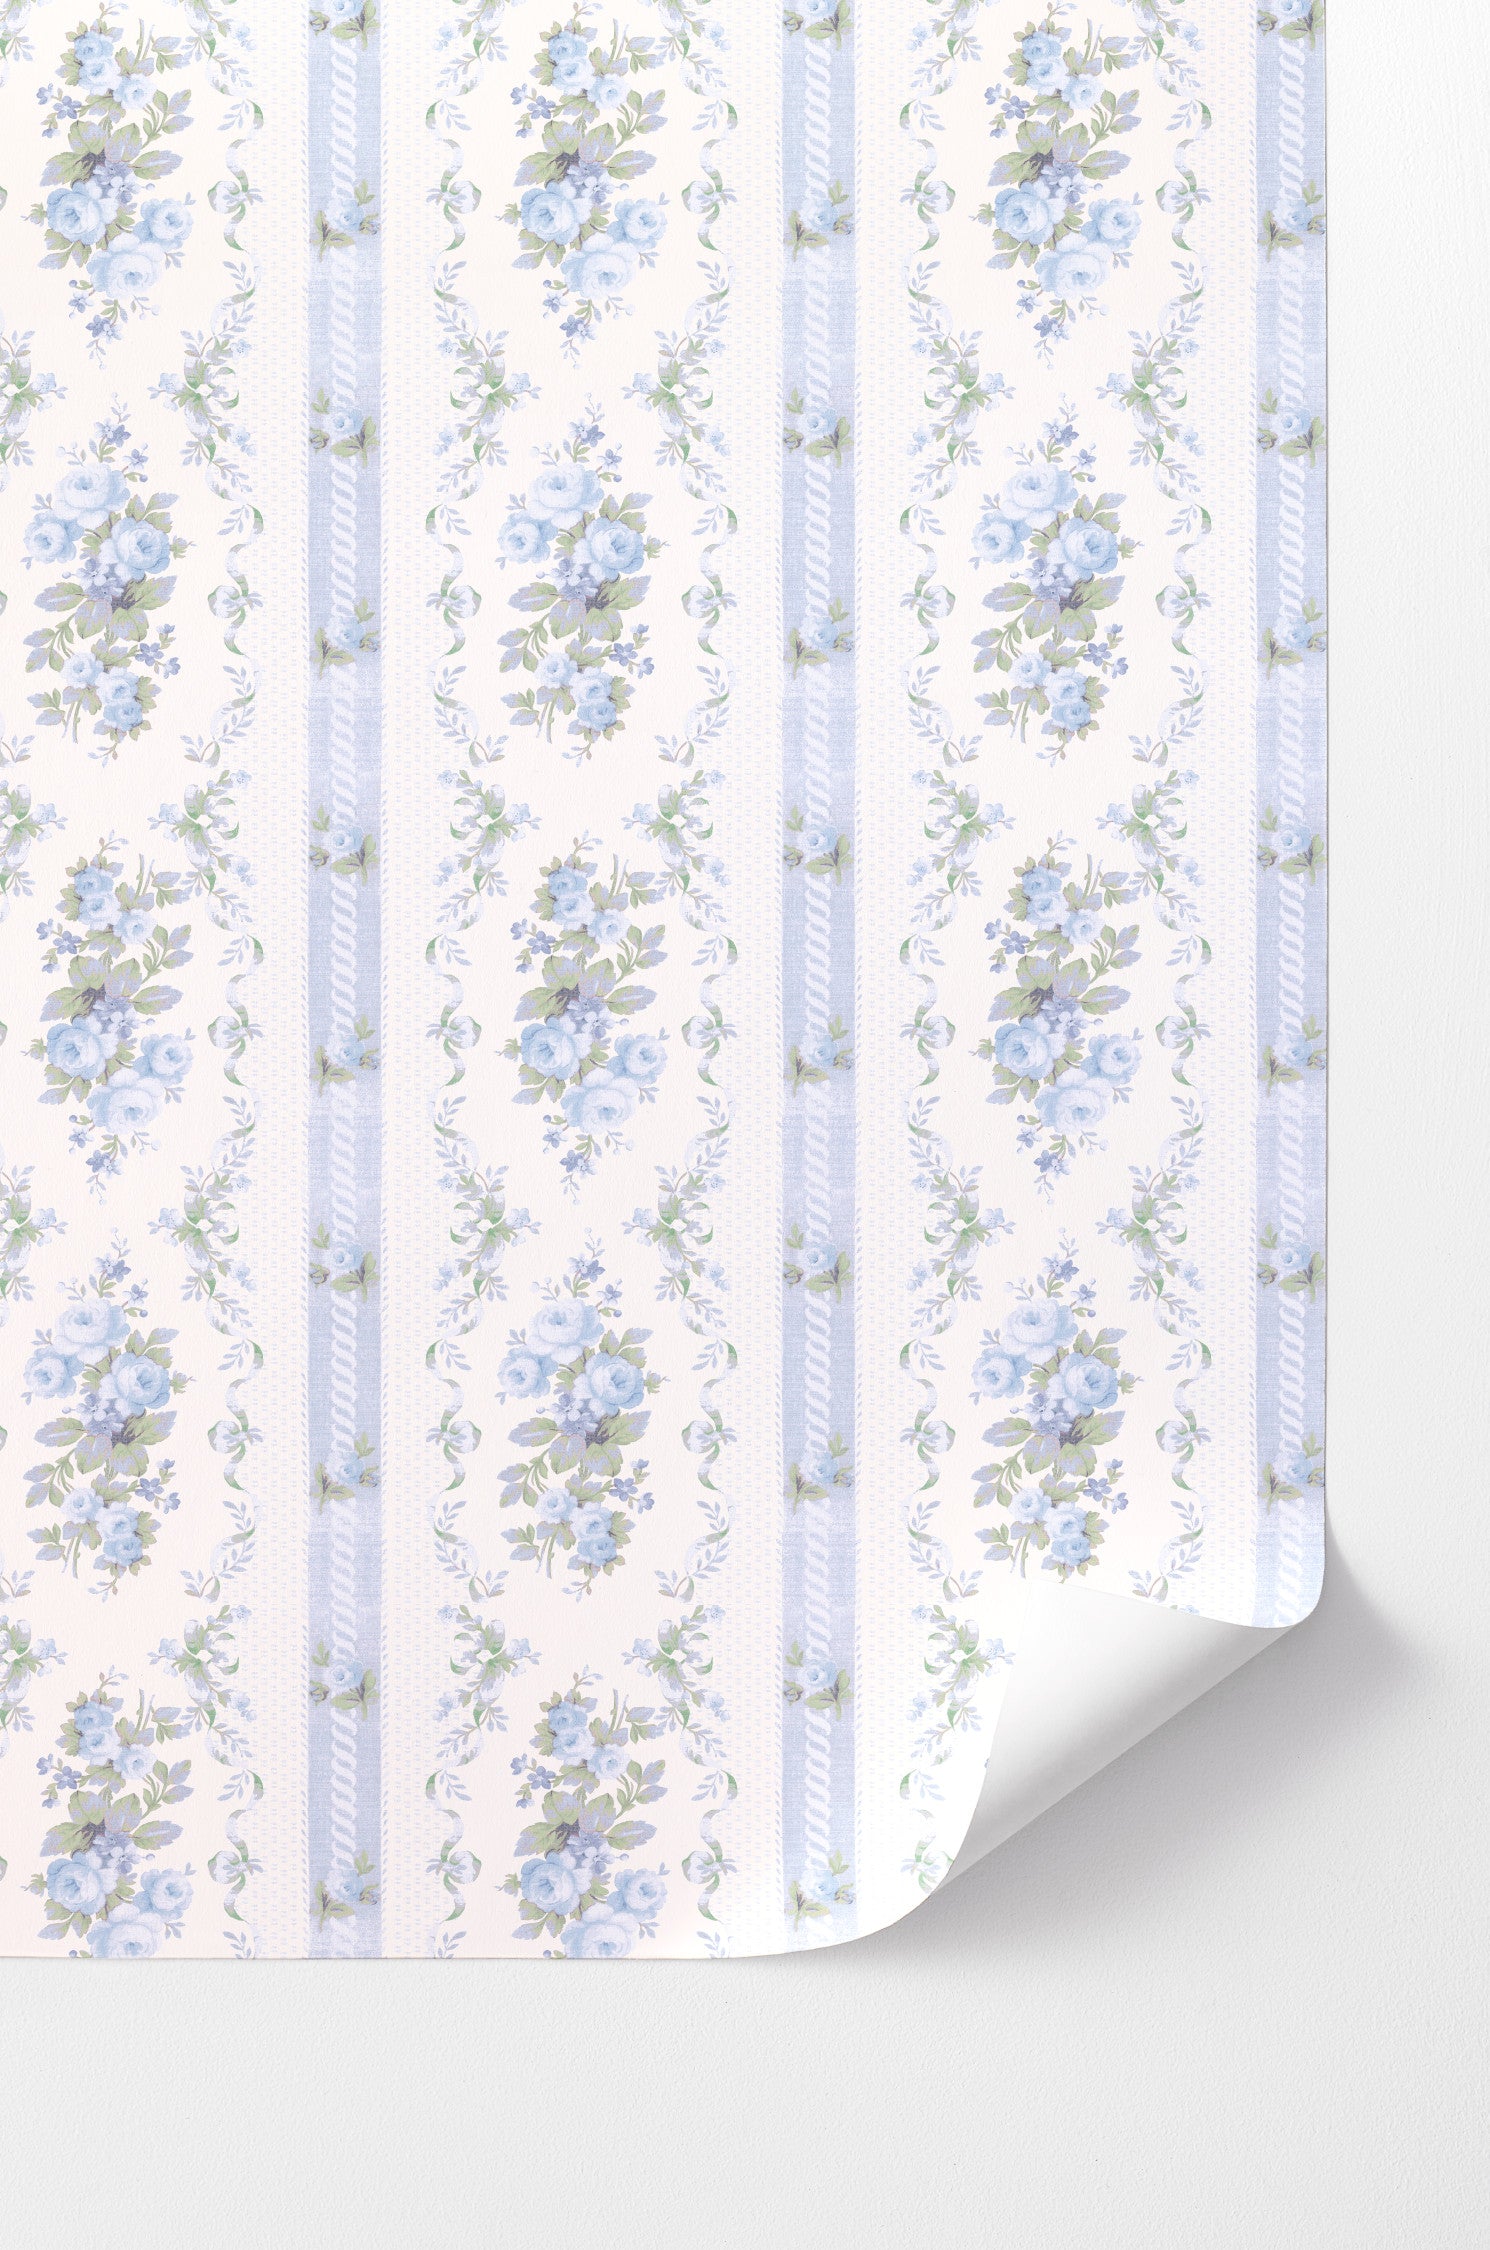 This design showcases beautiful baby blue floral prints delicately scattered across a pristine white backdrop. Adding to its visual appeal, a subtle blue strip elegantly separates the floral patterns, creating a sense of depth and space.